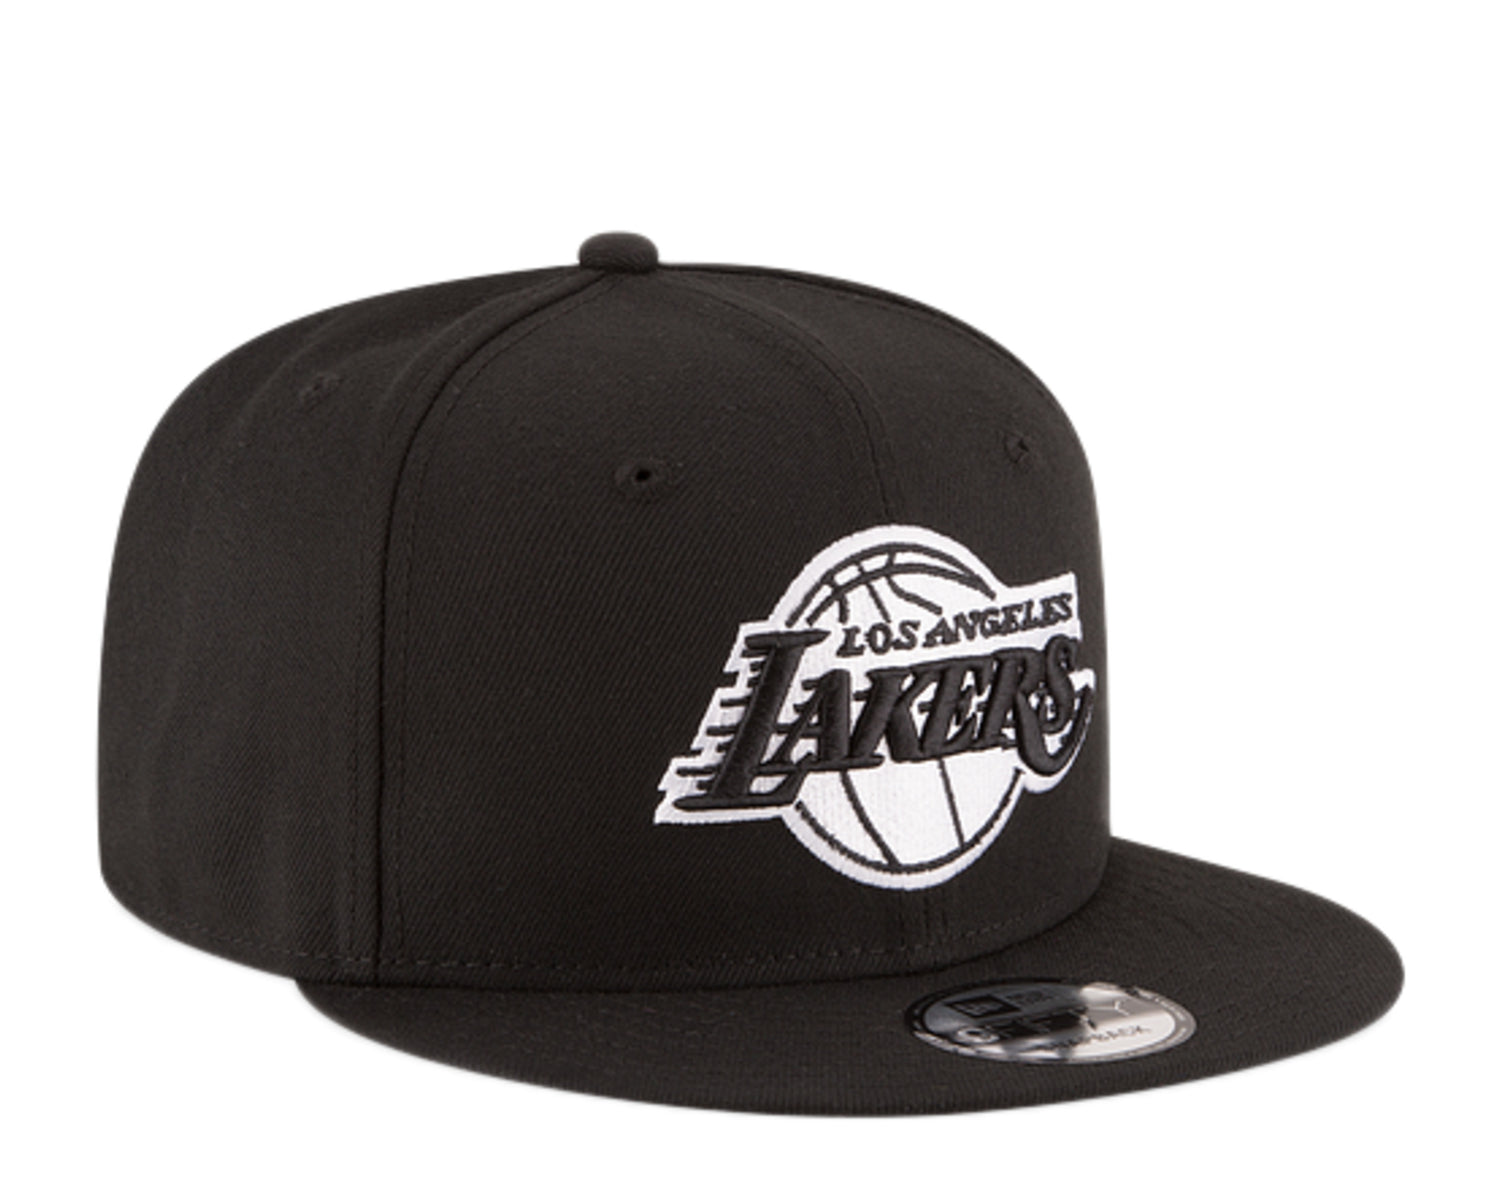 New Era 9Fifty NBA Los Angeles Lakers Black And White Snapback Hat